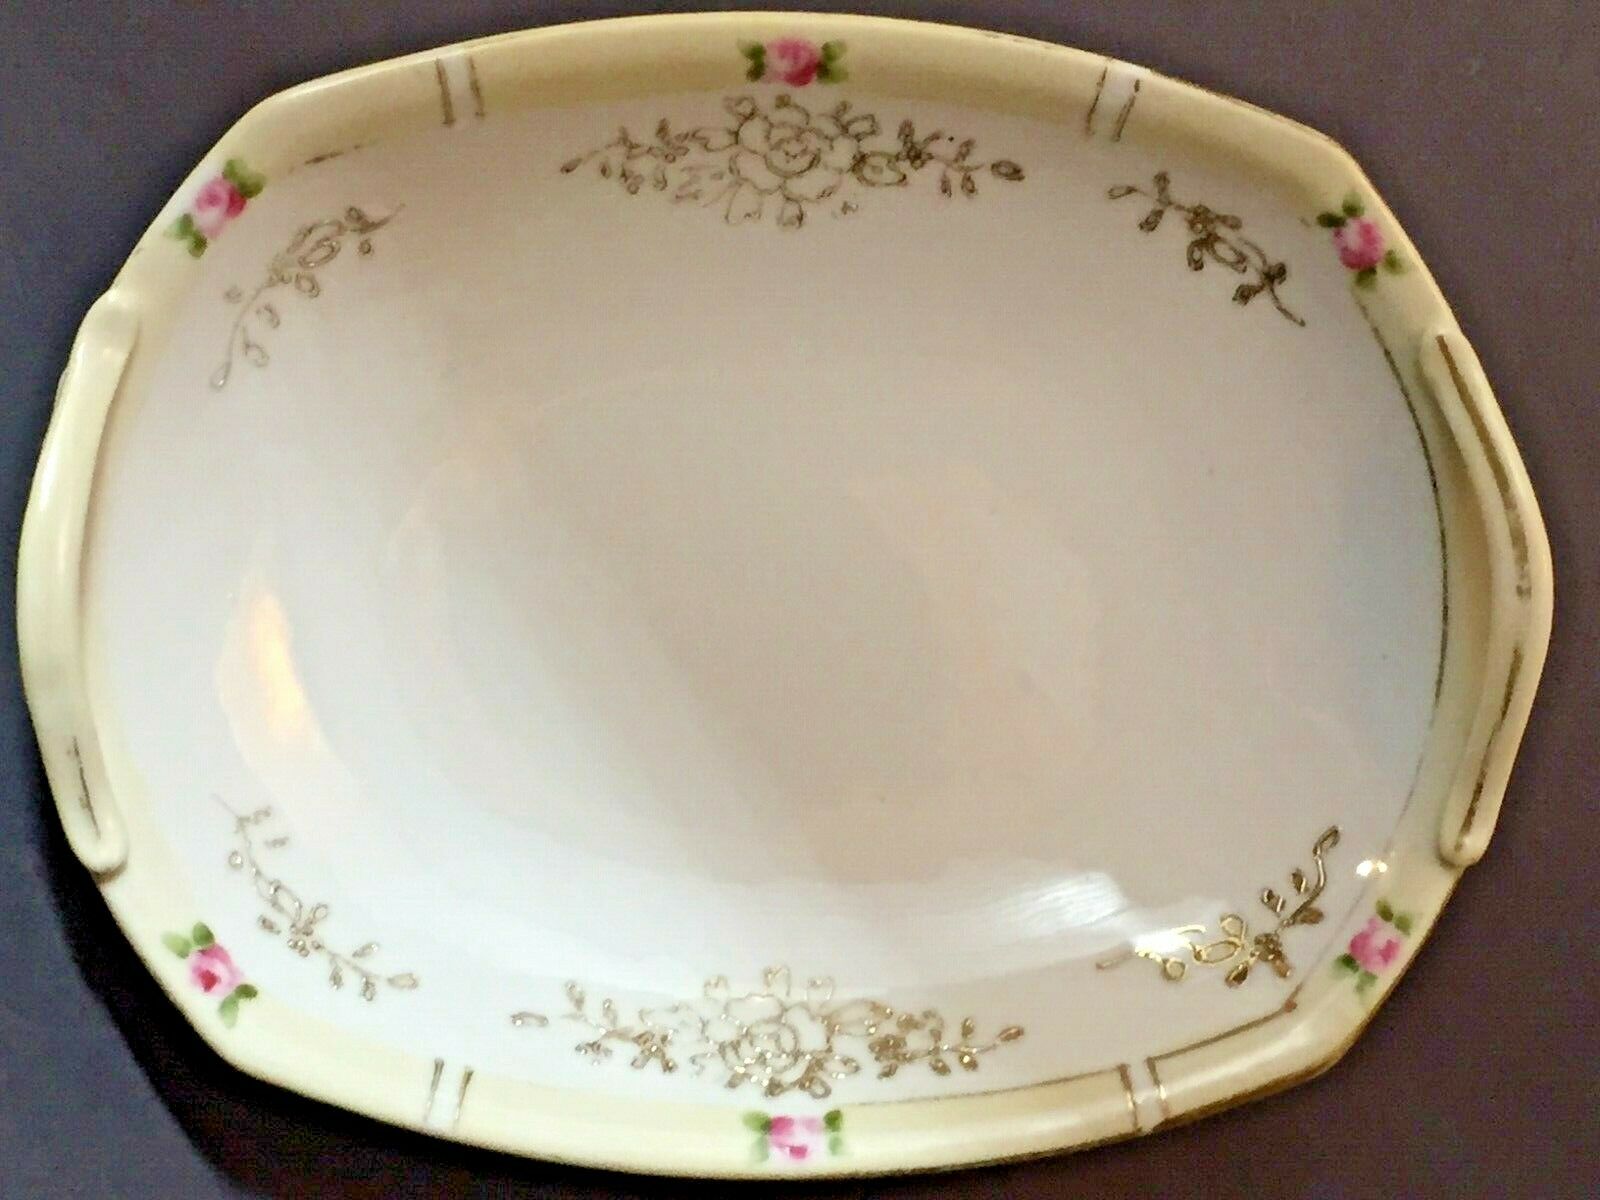 Vintage Nippon Porcelain Small Tray With Pink Roses And Gold Floral Accents/trim